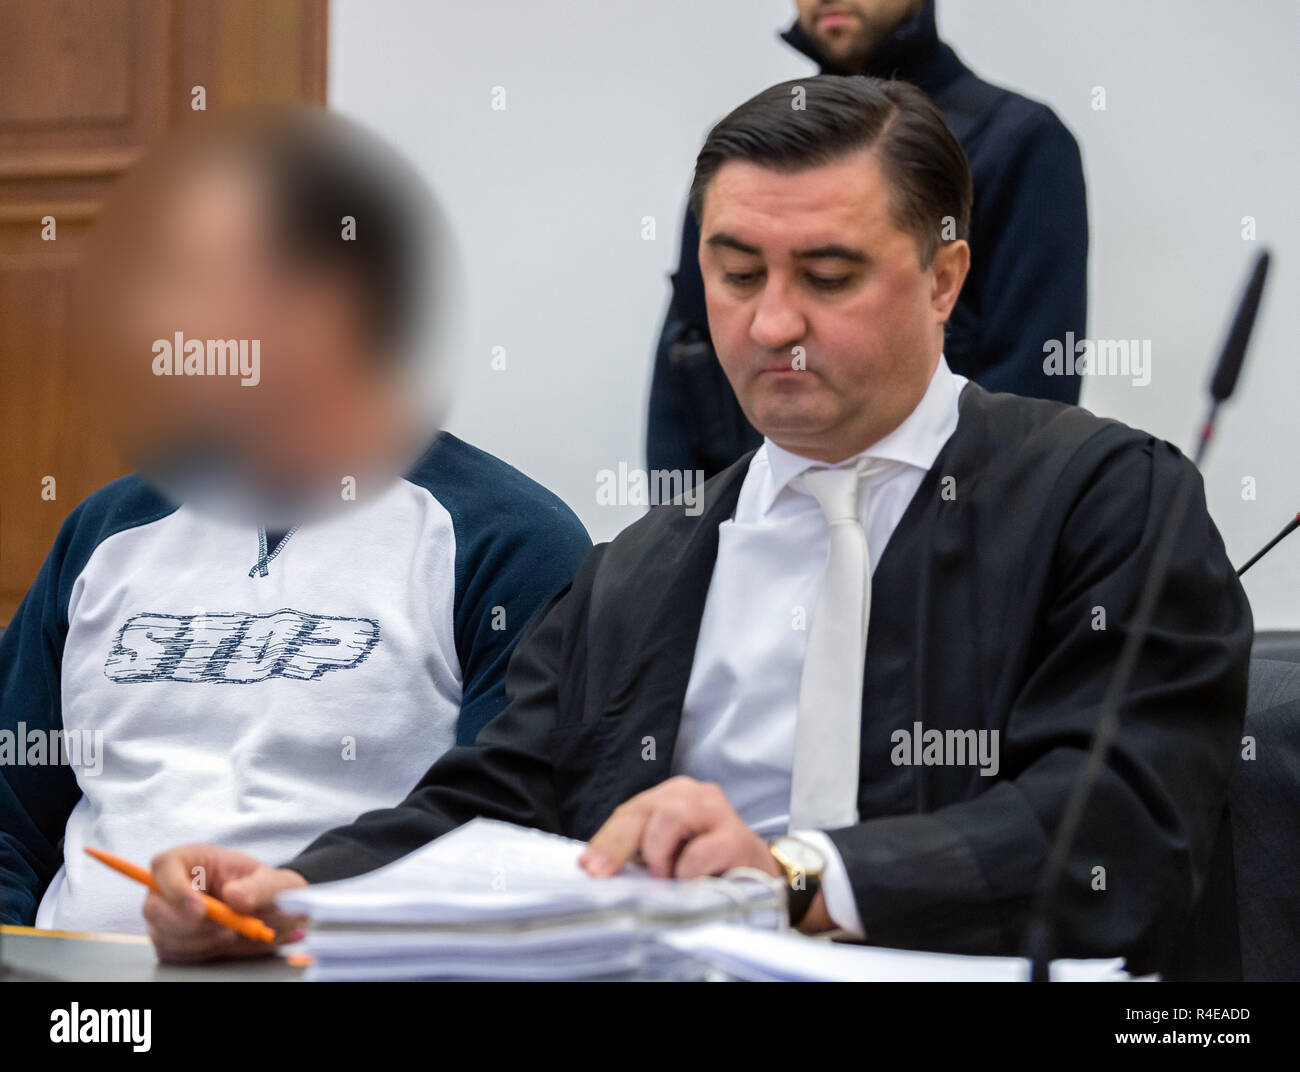 27 November 2018, Hessen, Gießen: The 48-year-old defendant (l) sits before the trial in the courtroom of the Regional Court next to his defender Alois Kovac. About three years ago, the son of the billionaire Würth was kidnapped. Together with accomplices, the accused is said to have kidnapped the handicapped son of the Baden-Württemberg entrepreneur Reinhold Würth in June 2015 in Schlitz, East Hesse, and demanded a ransom of three million euros. After a failed handover the victim was found one day later in a forest near Würzburg, unharmed and chained to a tree. Photo: Silas Stein/dpa - ATTENT Stock Photo